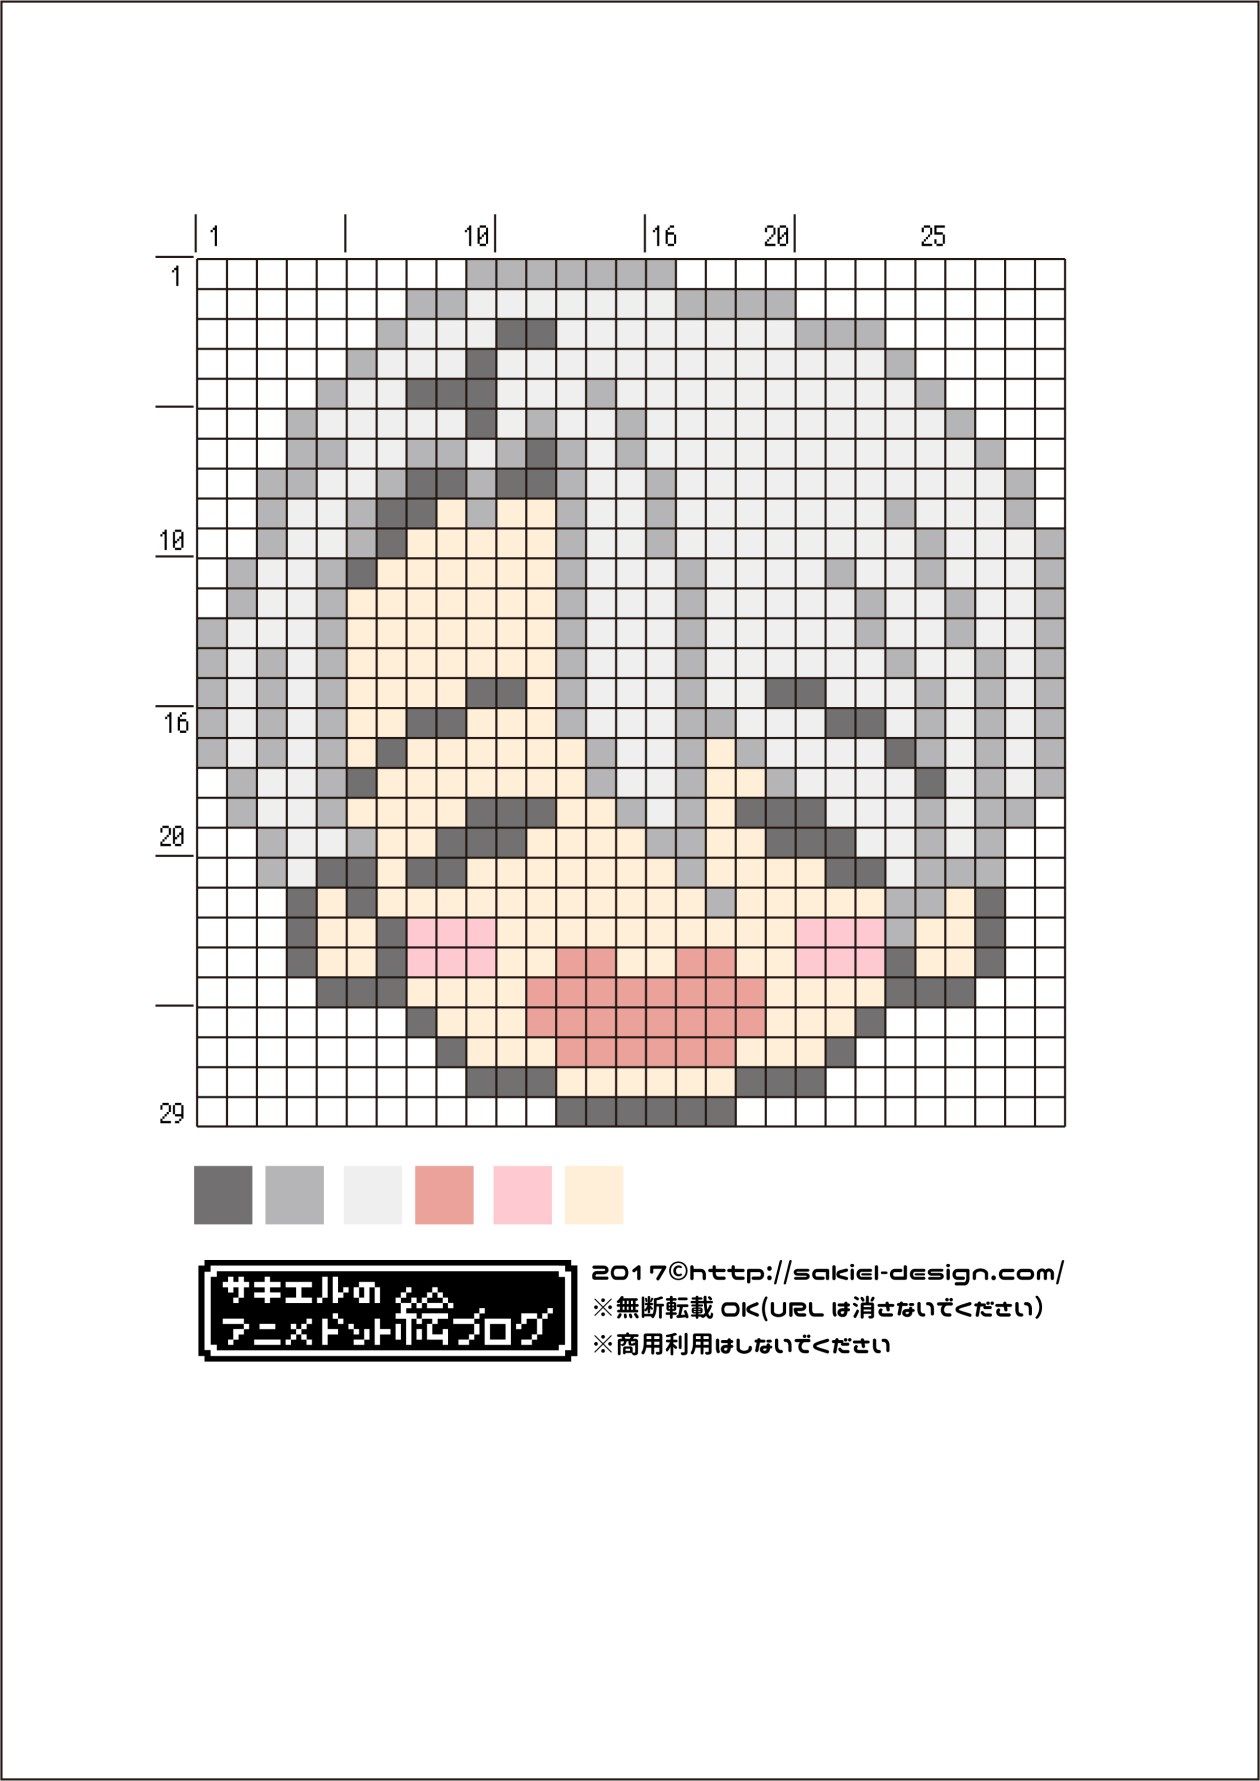 Anime Pixel Art Grid ユーリオンアイス ヴィクトル ニキフォロフ フクースナー顔 のアイロンビーズ図案 サキエルのアニメドット絵ブログ Infographicnow Com Your Number One Source For Daily Infographics Visual Creativity